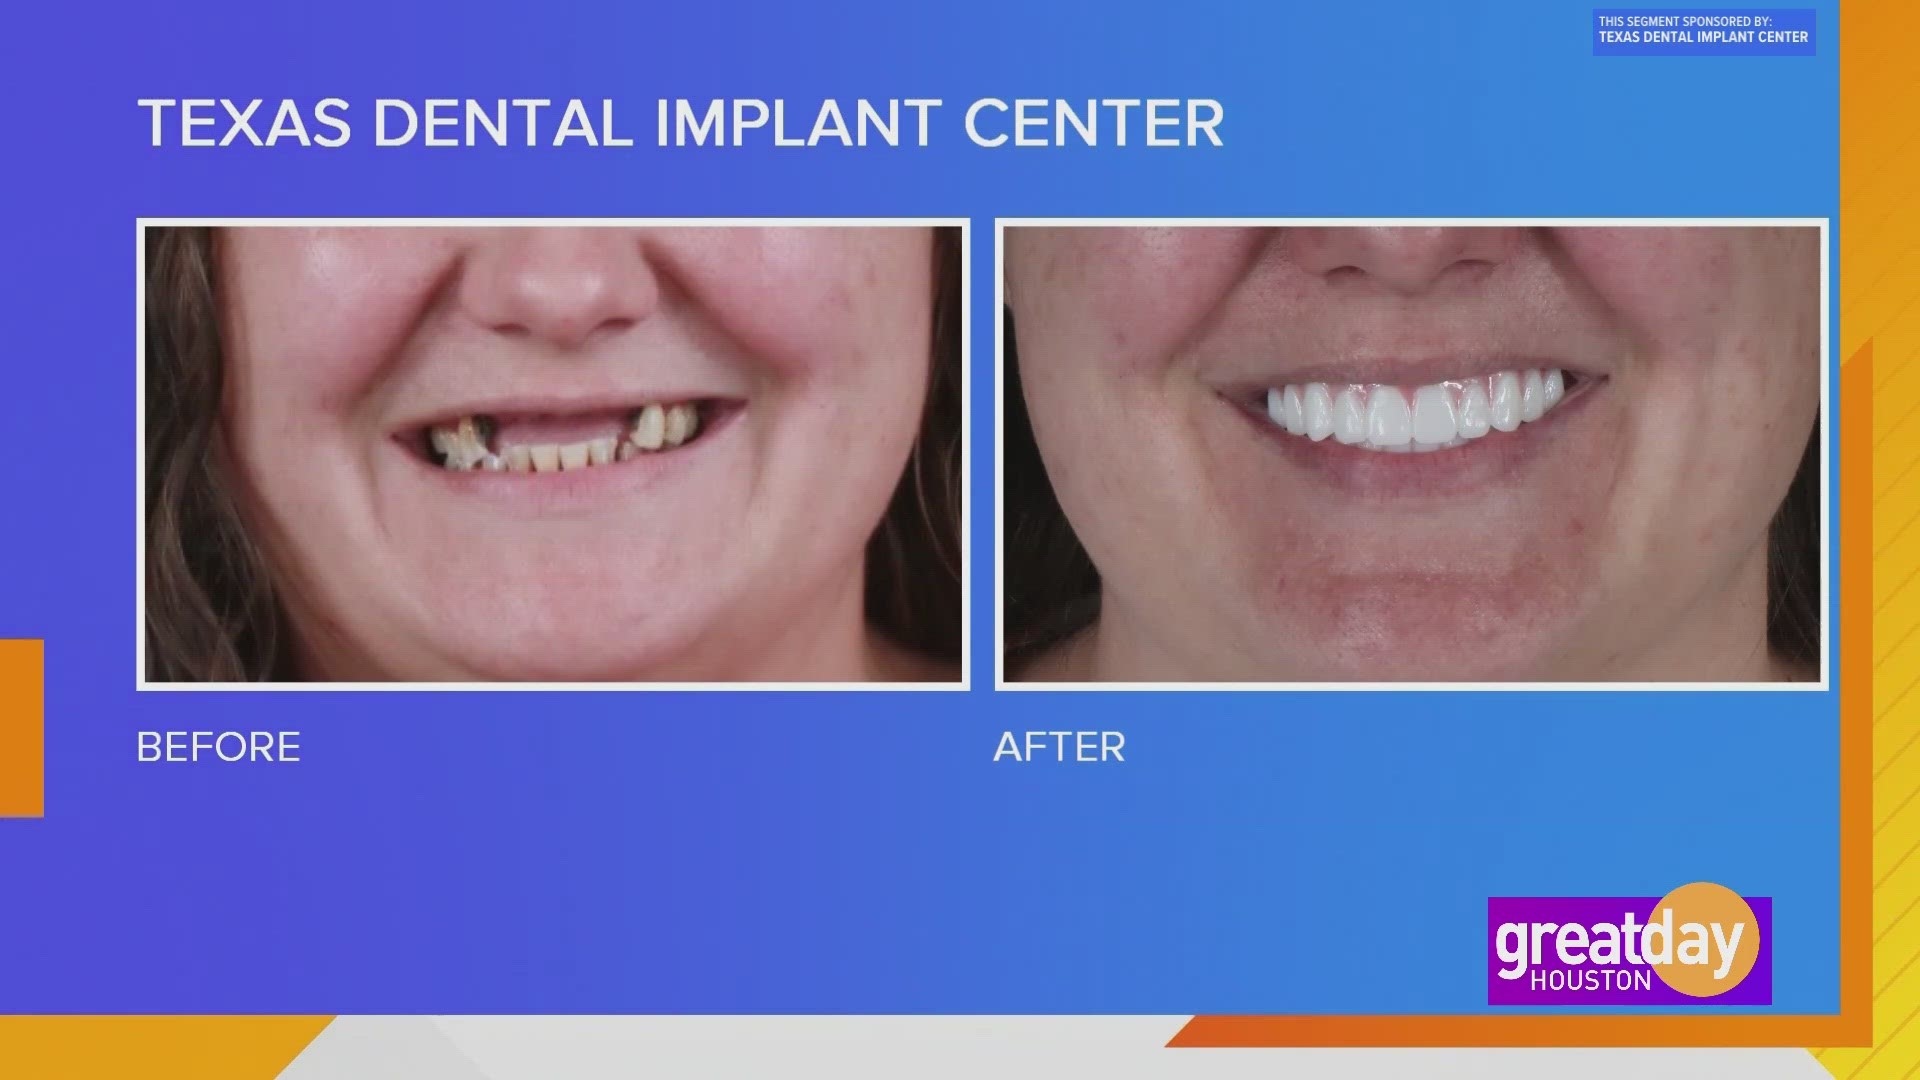 For decades, Philis Sikes battled with failing teeth. With one trip to Texas Dental Implant Center her life changed forever and yours can too!